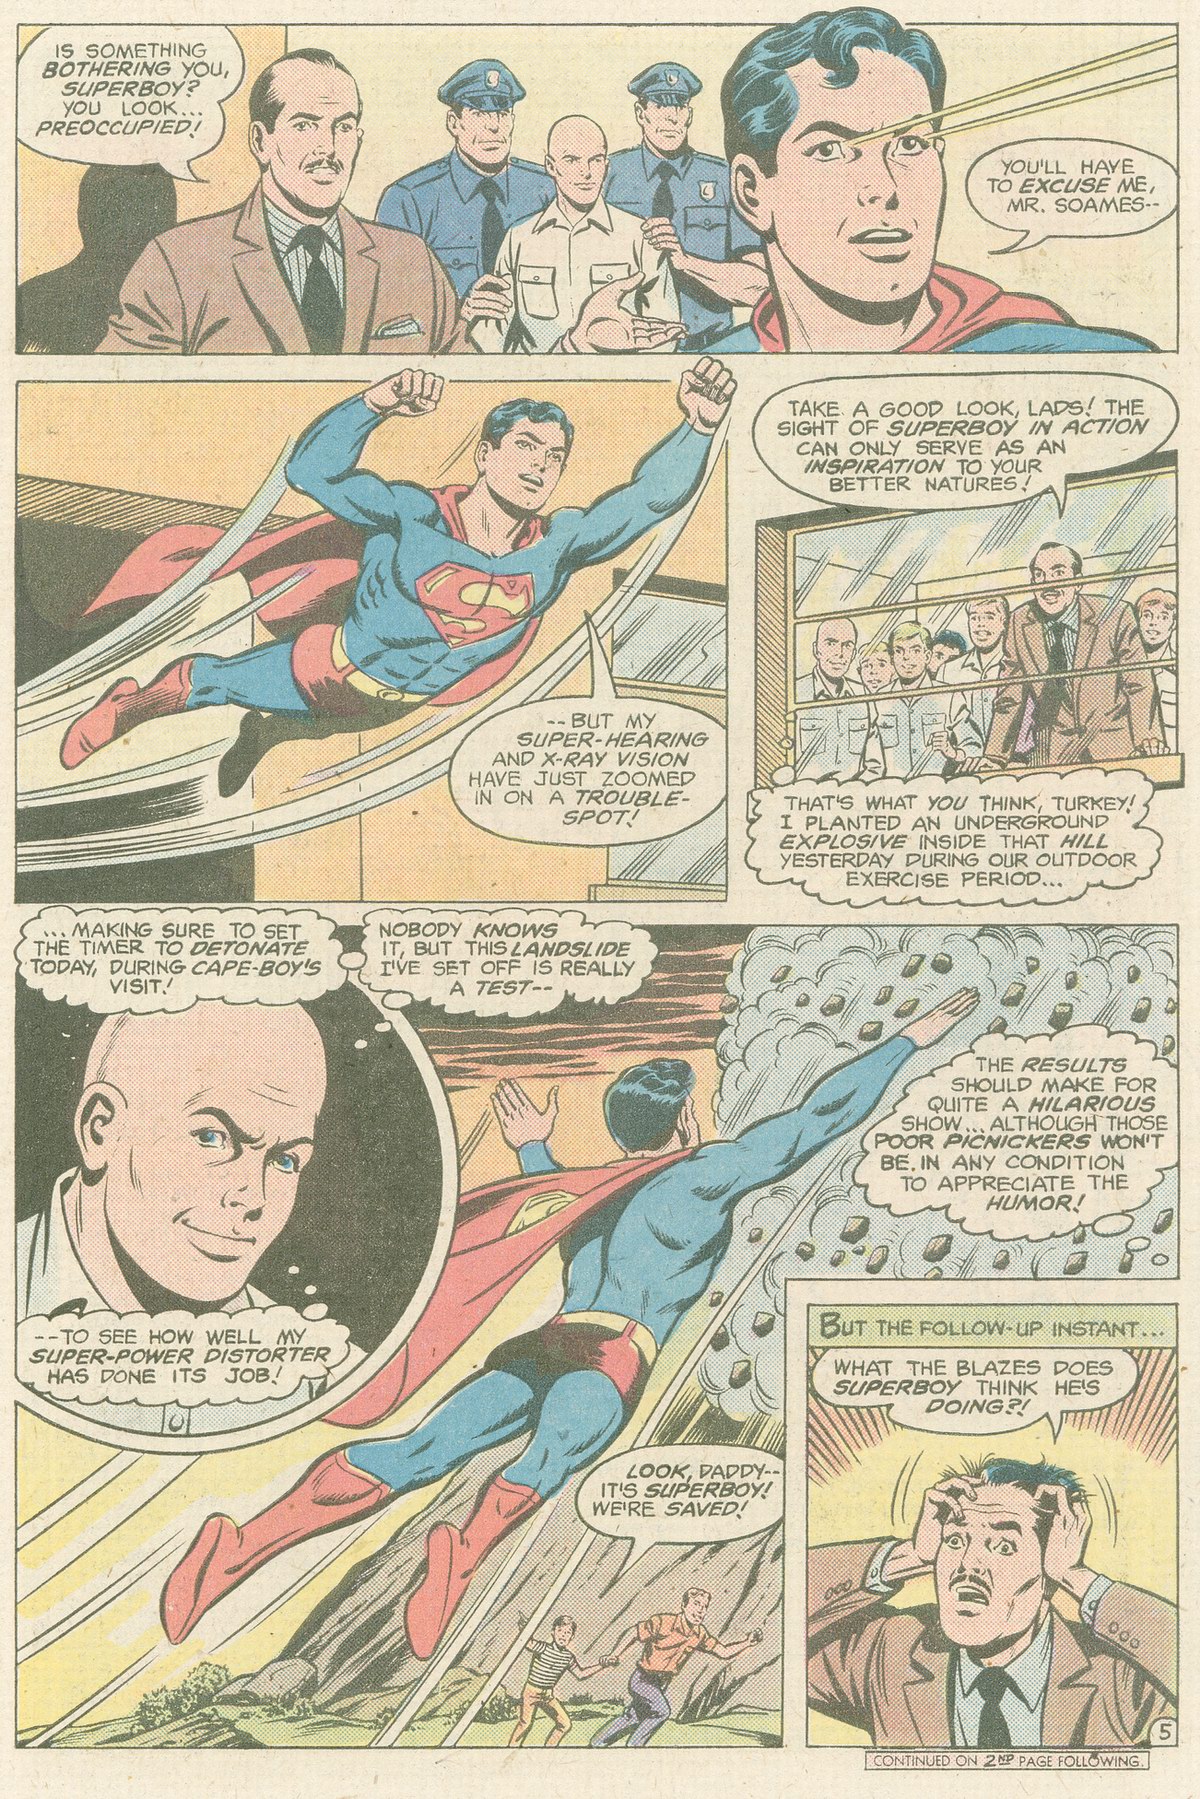 The New Adventures of Superboy 14 Page 5